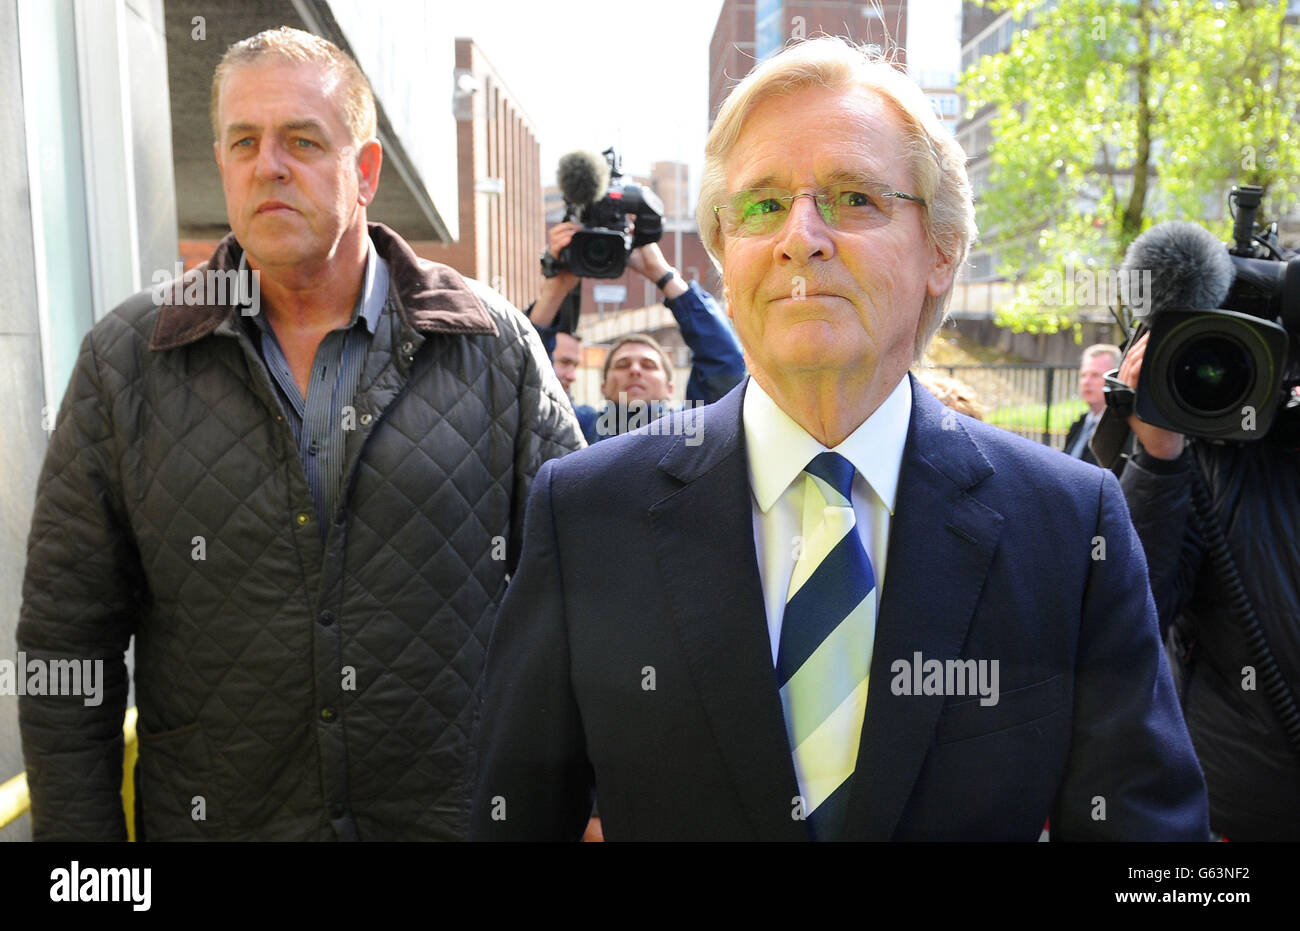 Coronation Street actor Bill Roache arrives at Preston Magistrates' Court where he is accused of raping a 15-year-old girl. Stock Photo